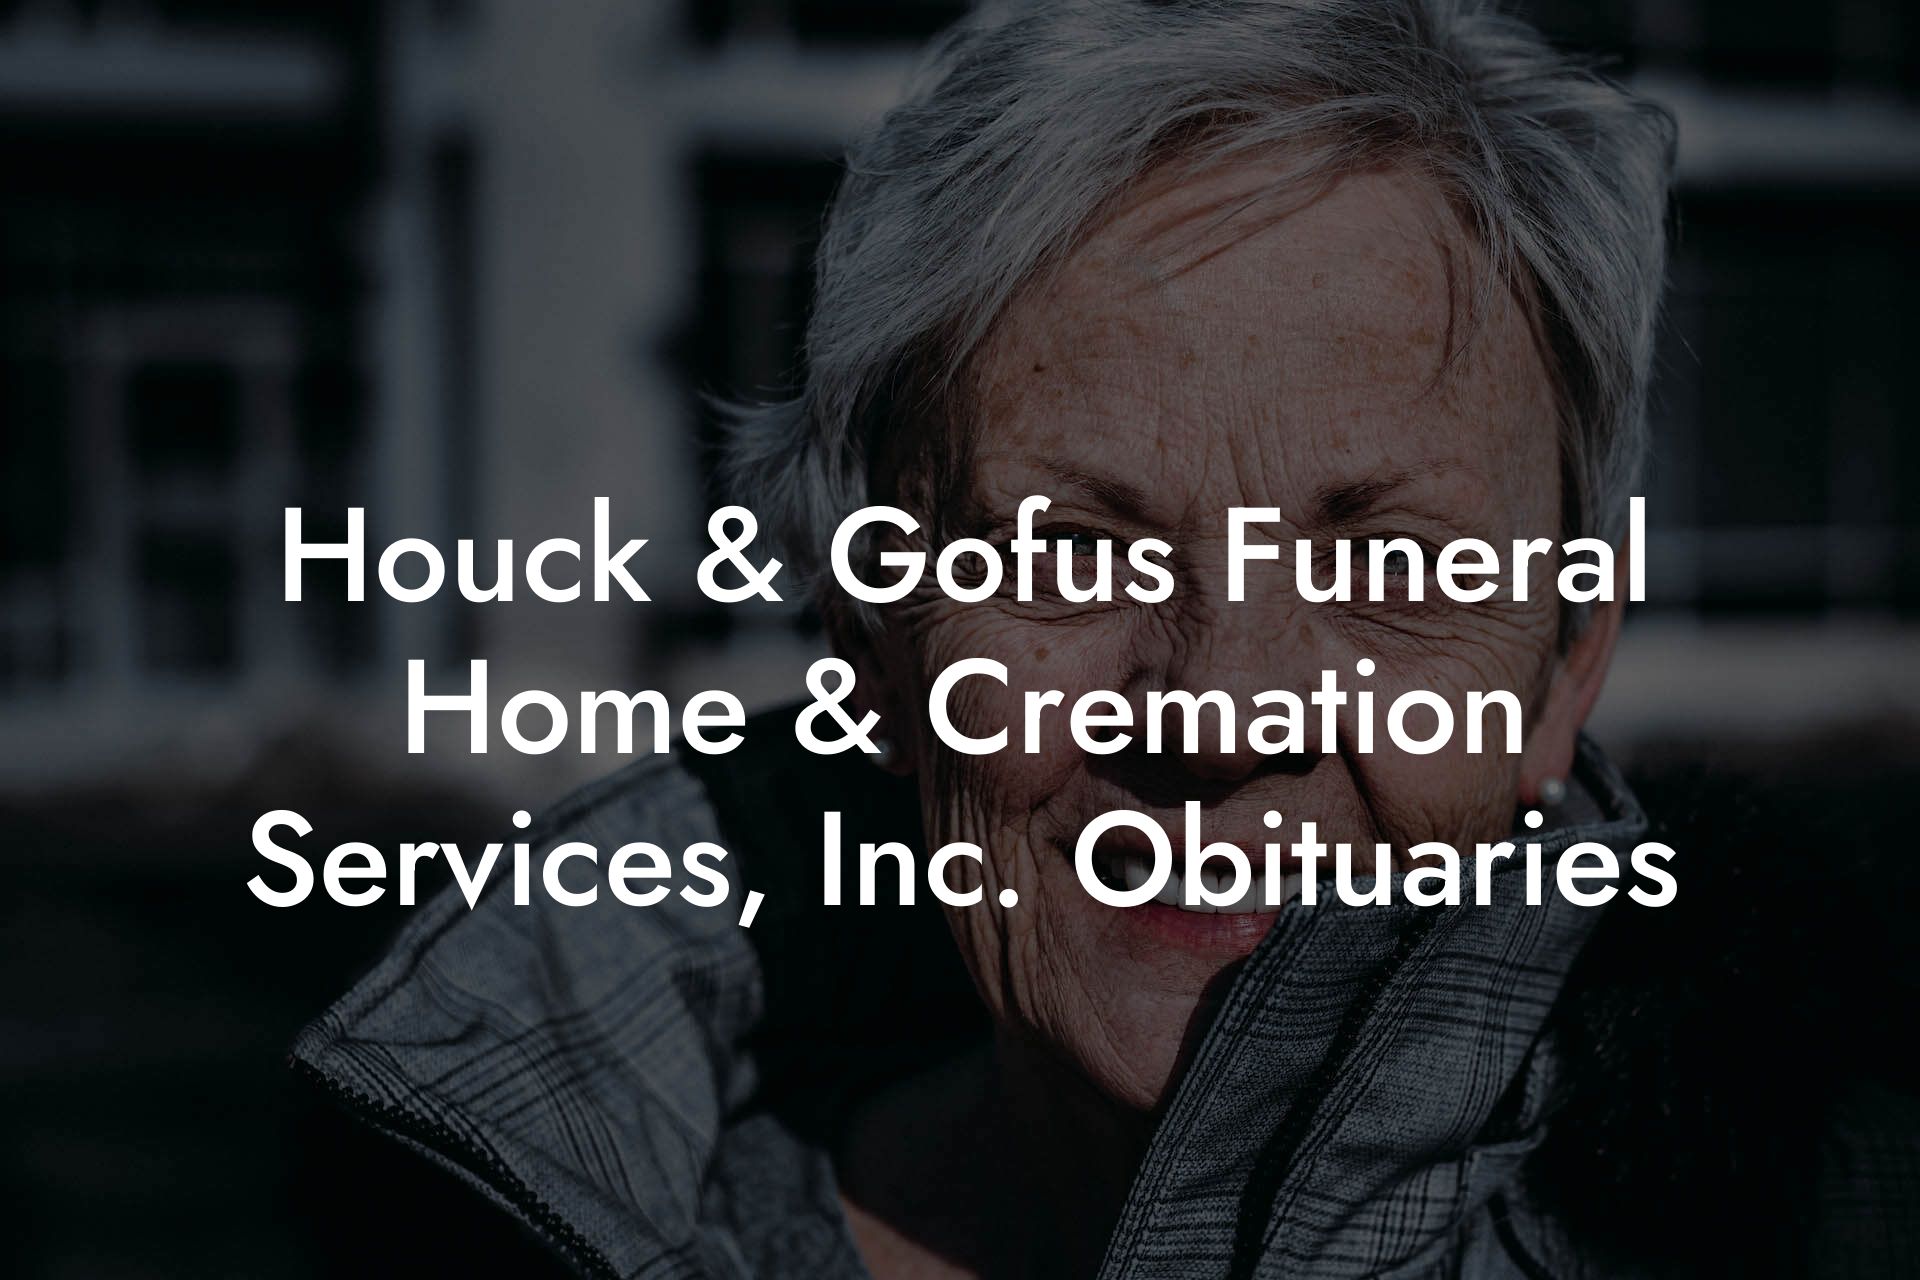 Houck & Gofus Funeral Home & Cremation Services, Inc. Obituaries